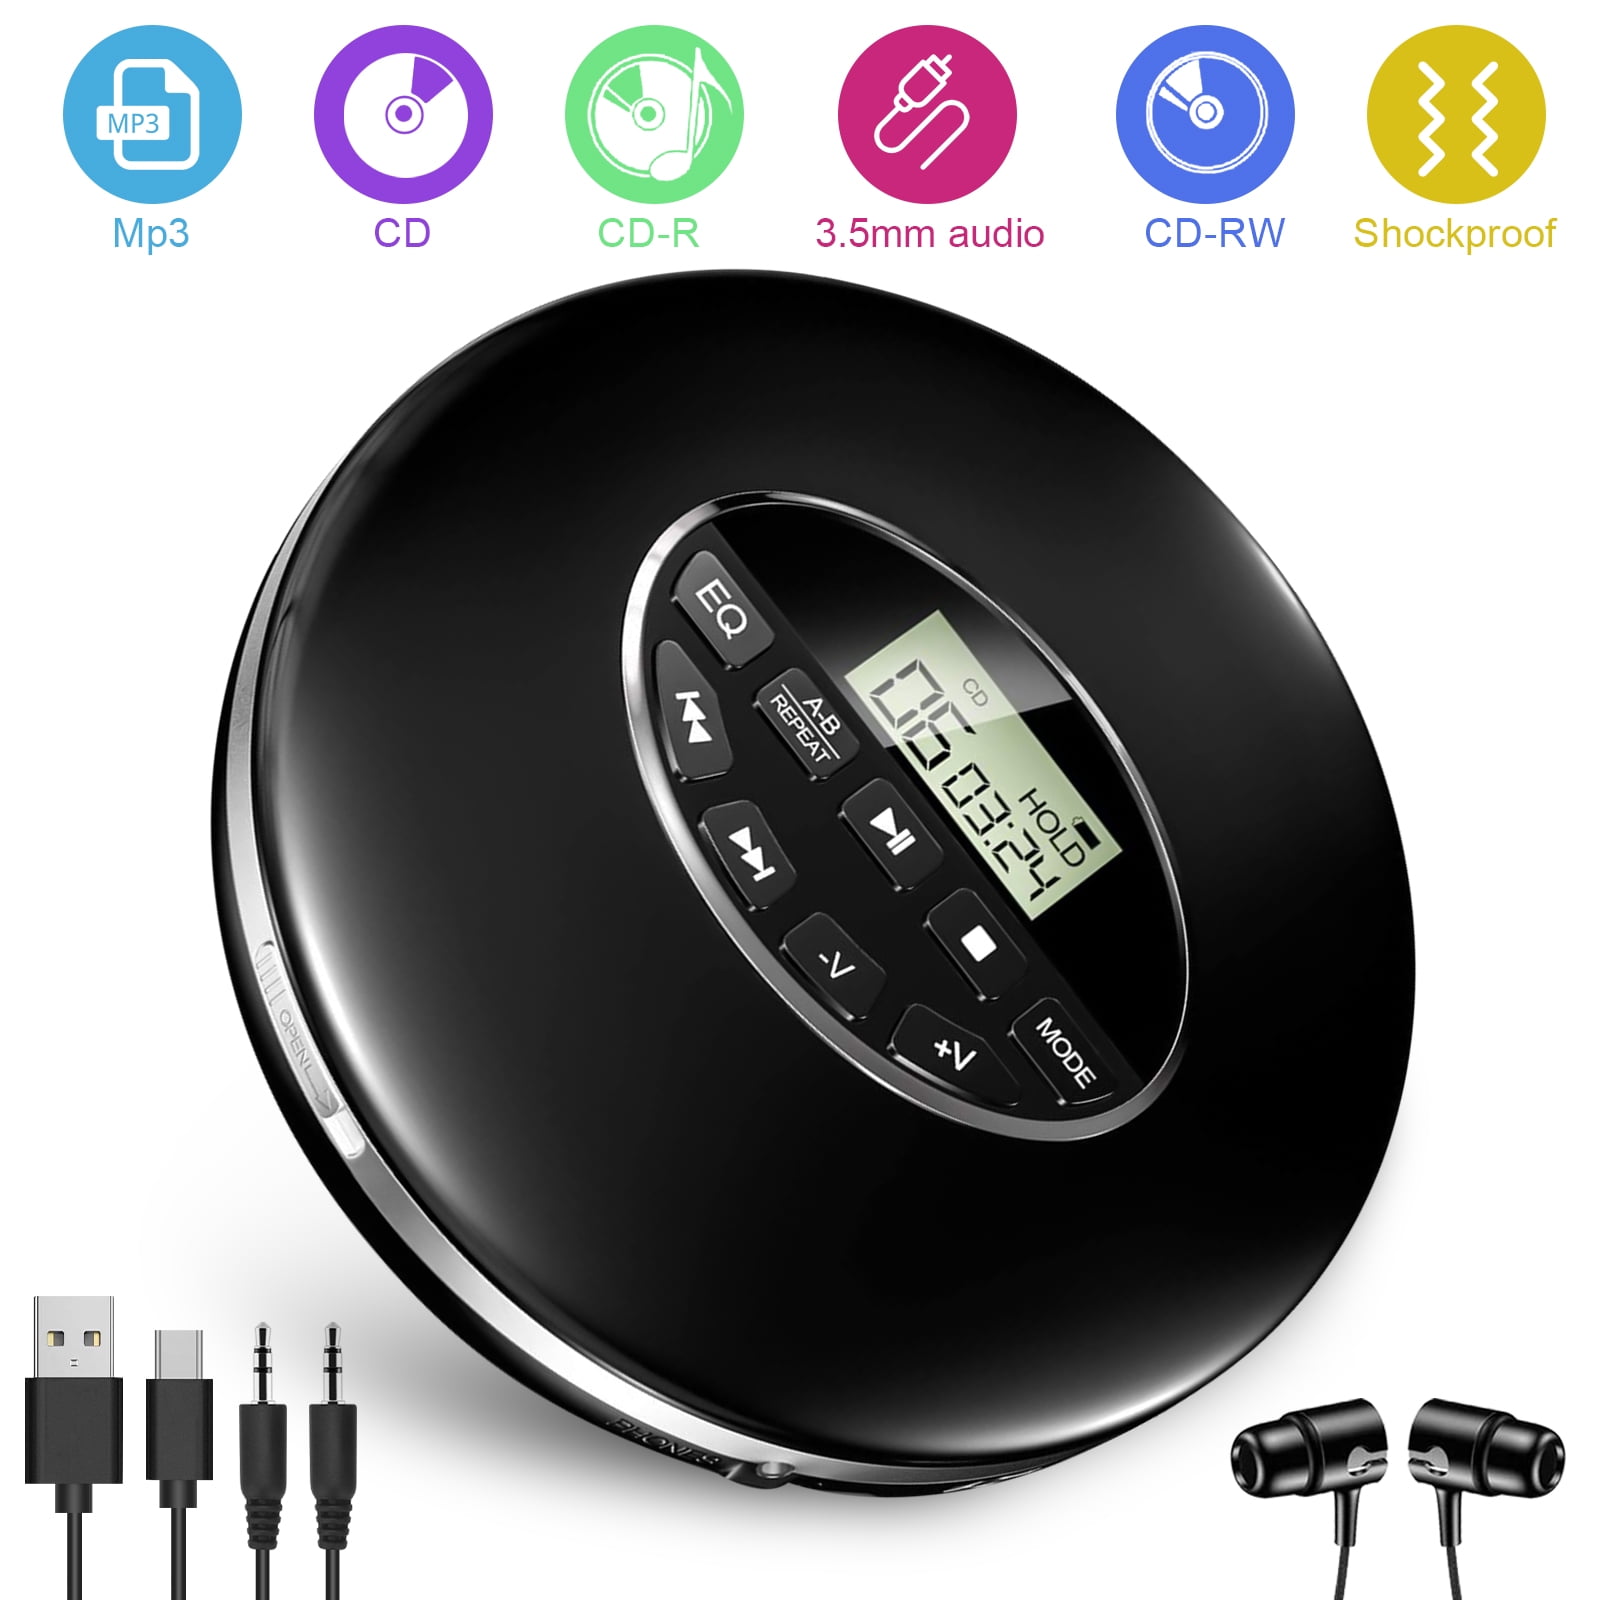 Portable CD Player CD-R Mini Rechargable Disc Music Player with LCD Display Support MP3 CD 1# CD-RW for Travel 